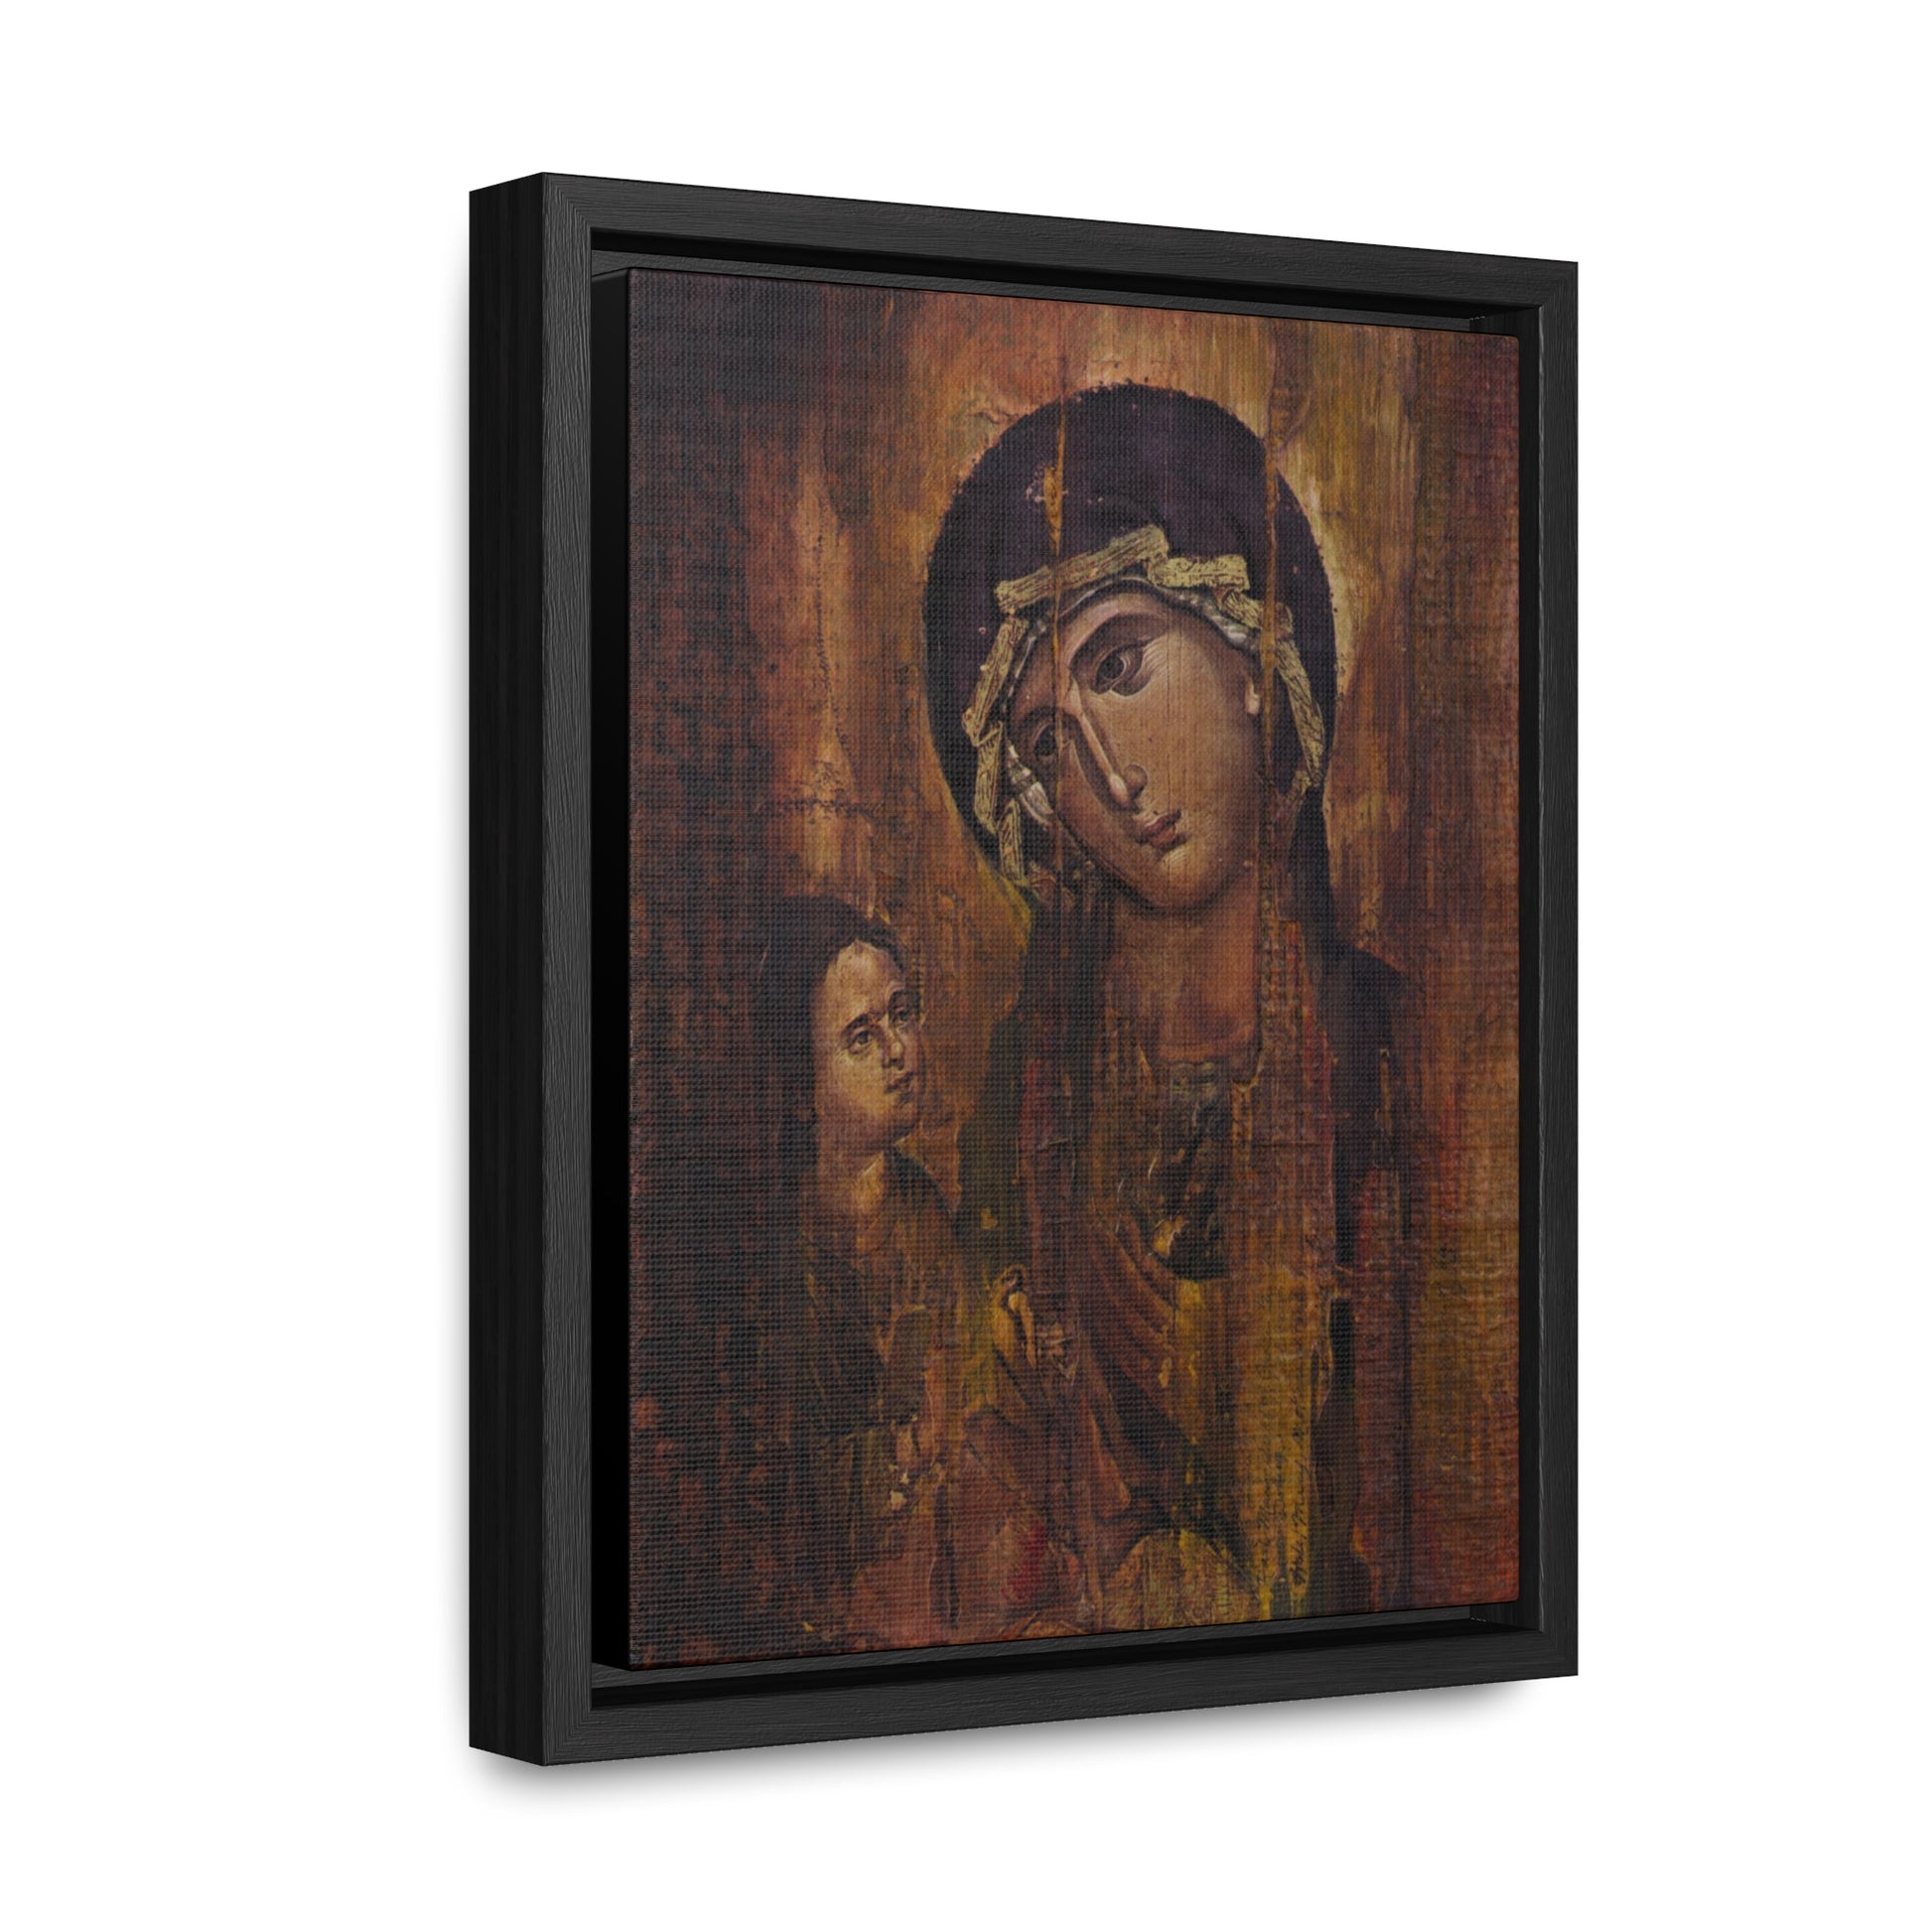 Our Lady of the Way - Framed Gallery Wrap Canvas 8"x10" - Studio Lams Creative Collective